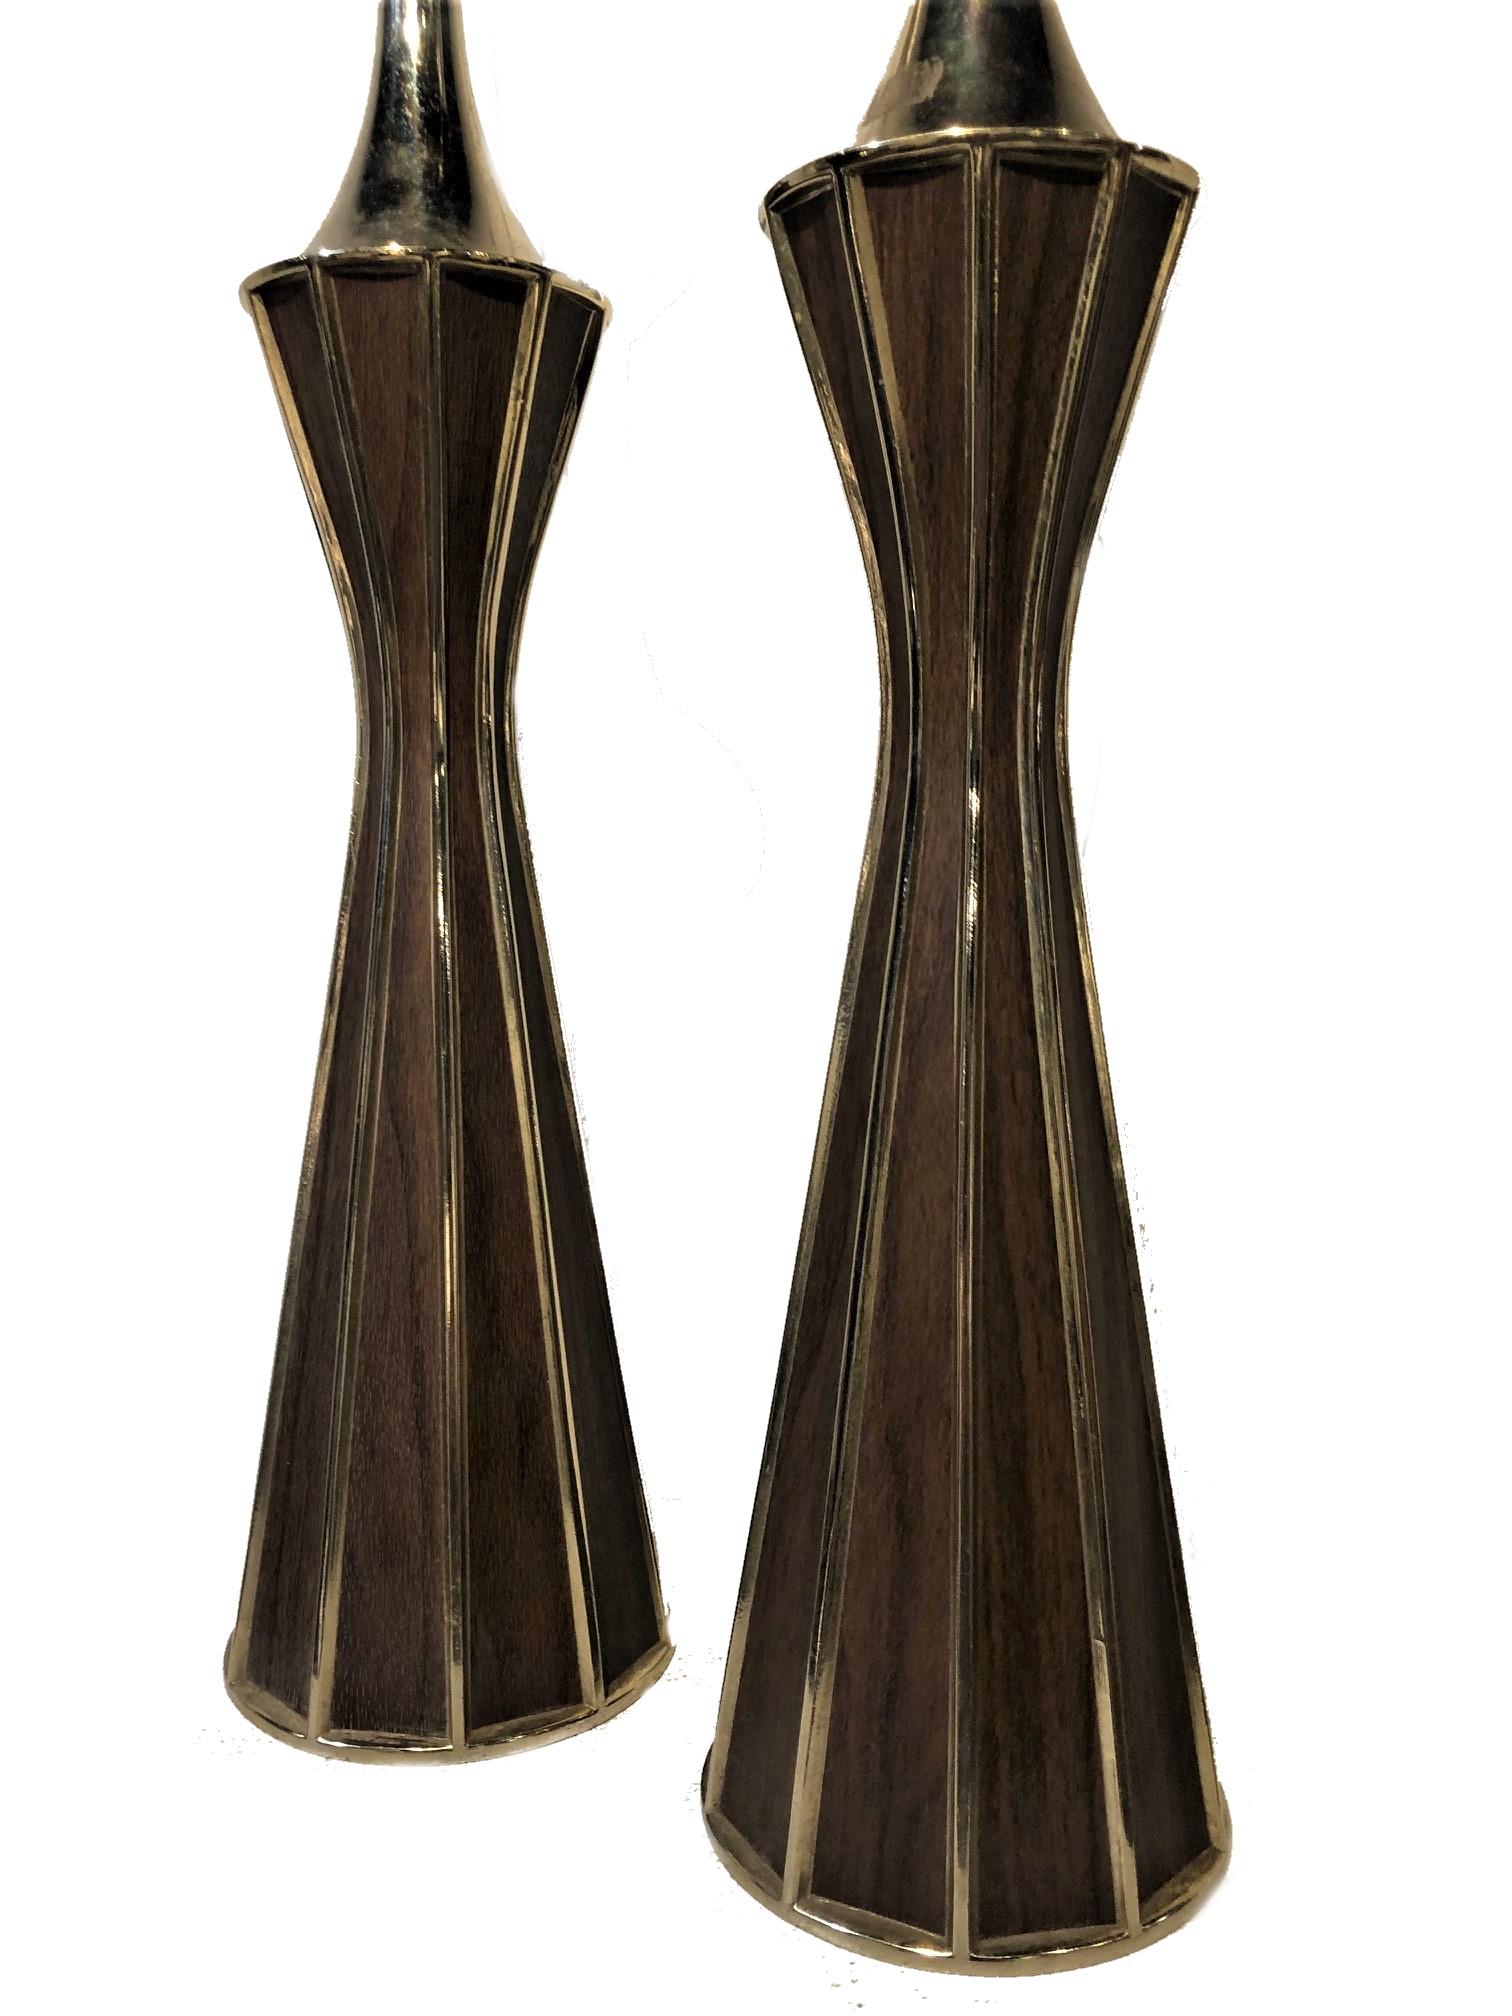 American A Pair of Modernist Brass and Wood Lamps in Mastercraft Style, ca. 1960s